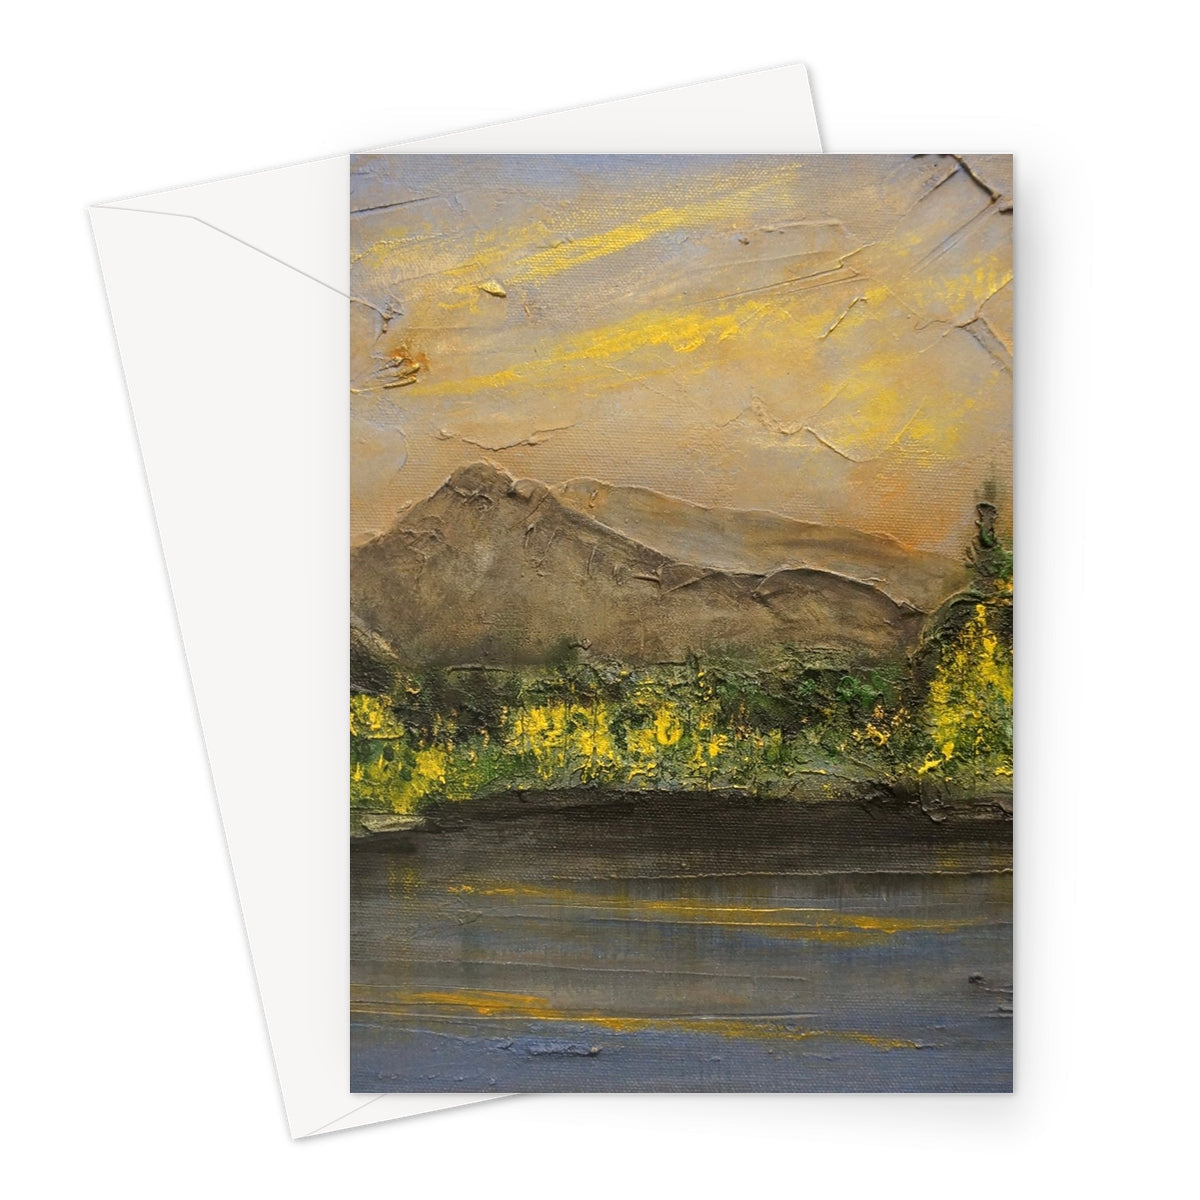 Glencoe Lochan Dusk Art Gifts Greeting Card-Greetings Cards-Scottish Lochs & Mountains Art Gallery-A5 Portrait-10 Cards-Paintings, Prints, Homeware, Art Gifts From Scotland By Scottish Artist Kevin Hunter